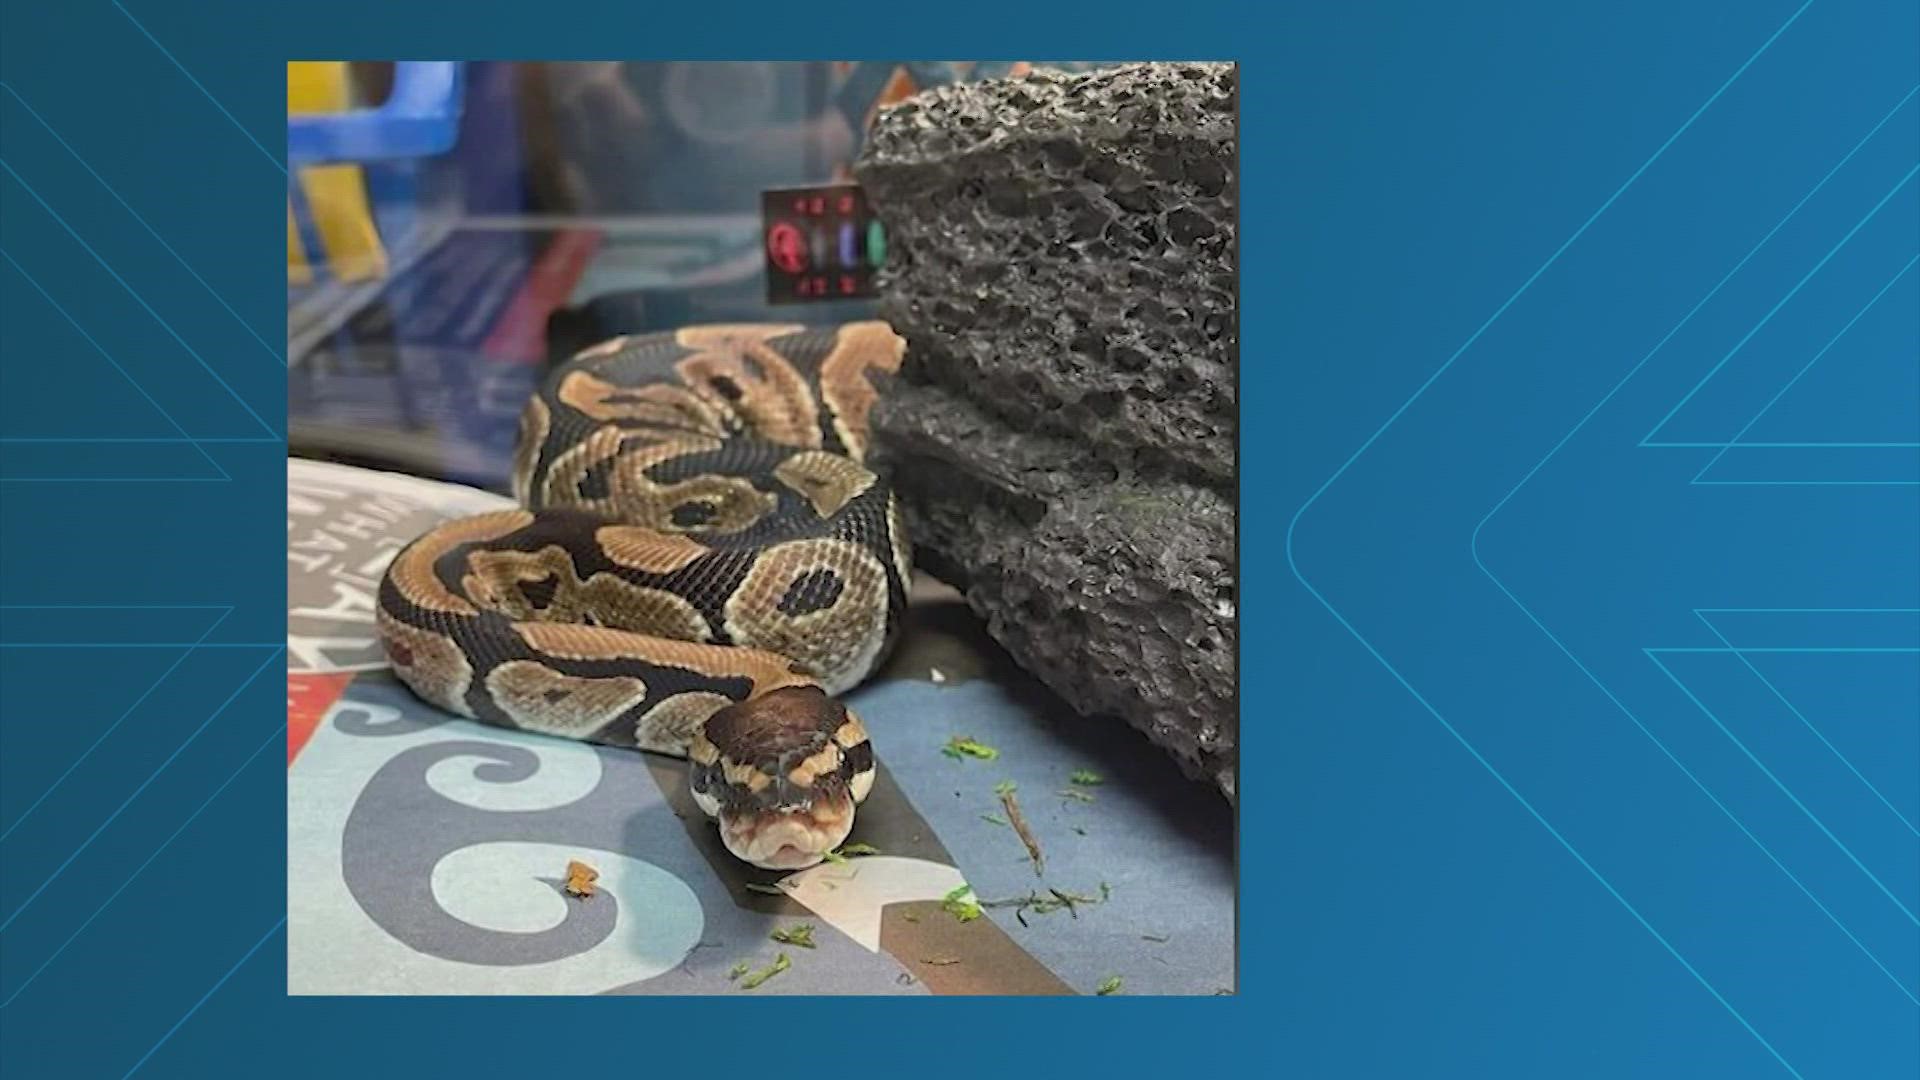 "Stressed and slightly spicy." That's how Animal Care and Control described a young python that was found hanging out on a shelf in a Walmart in Indiana.